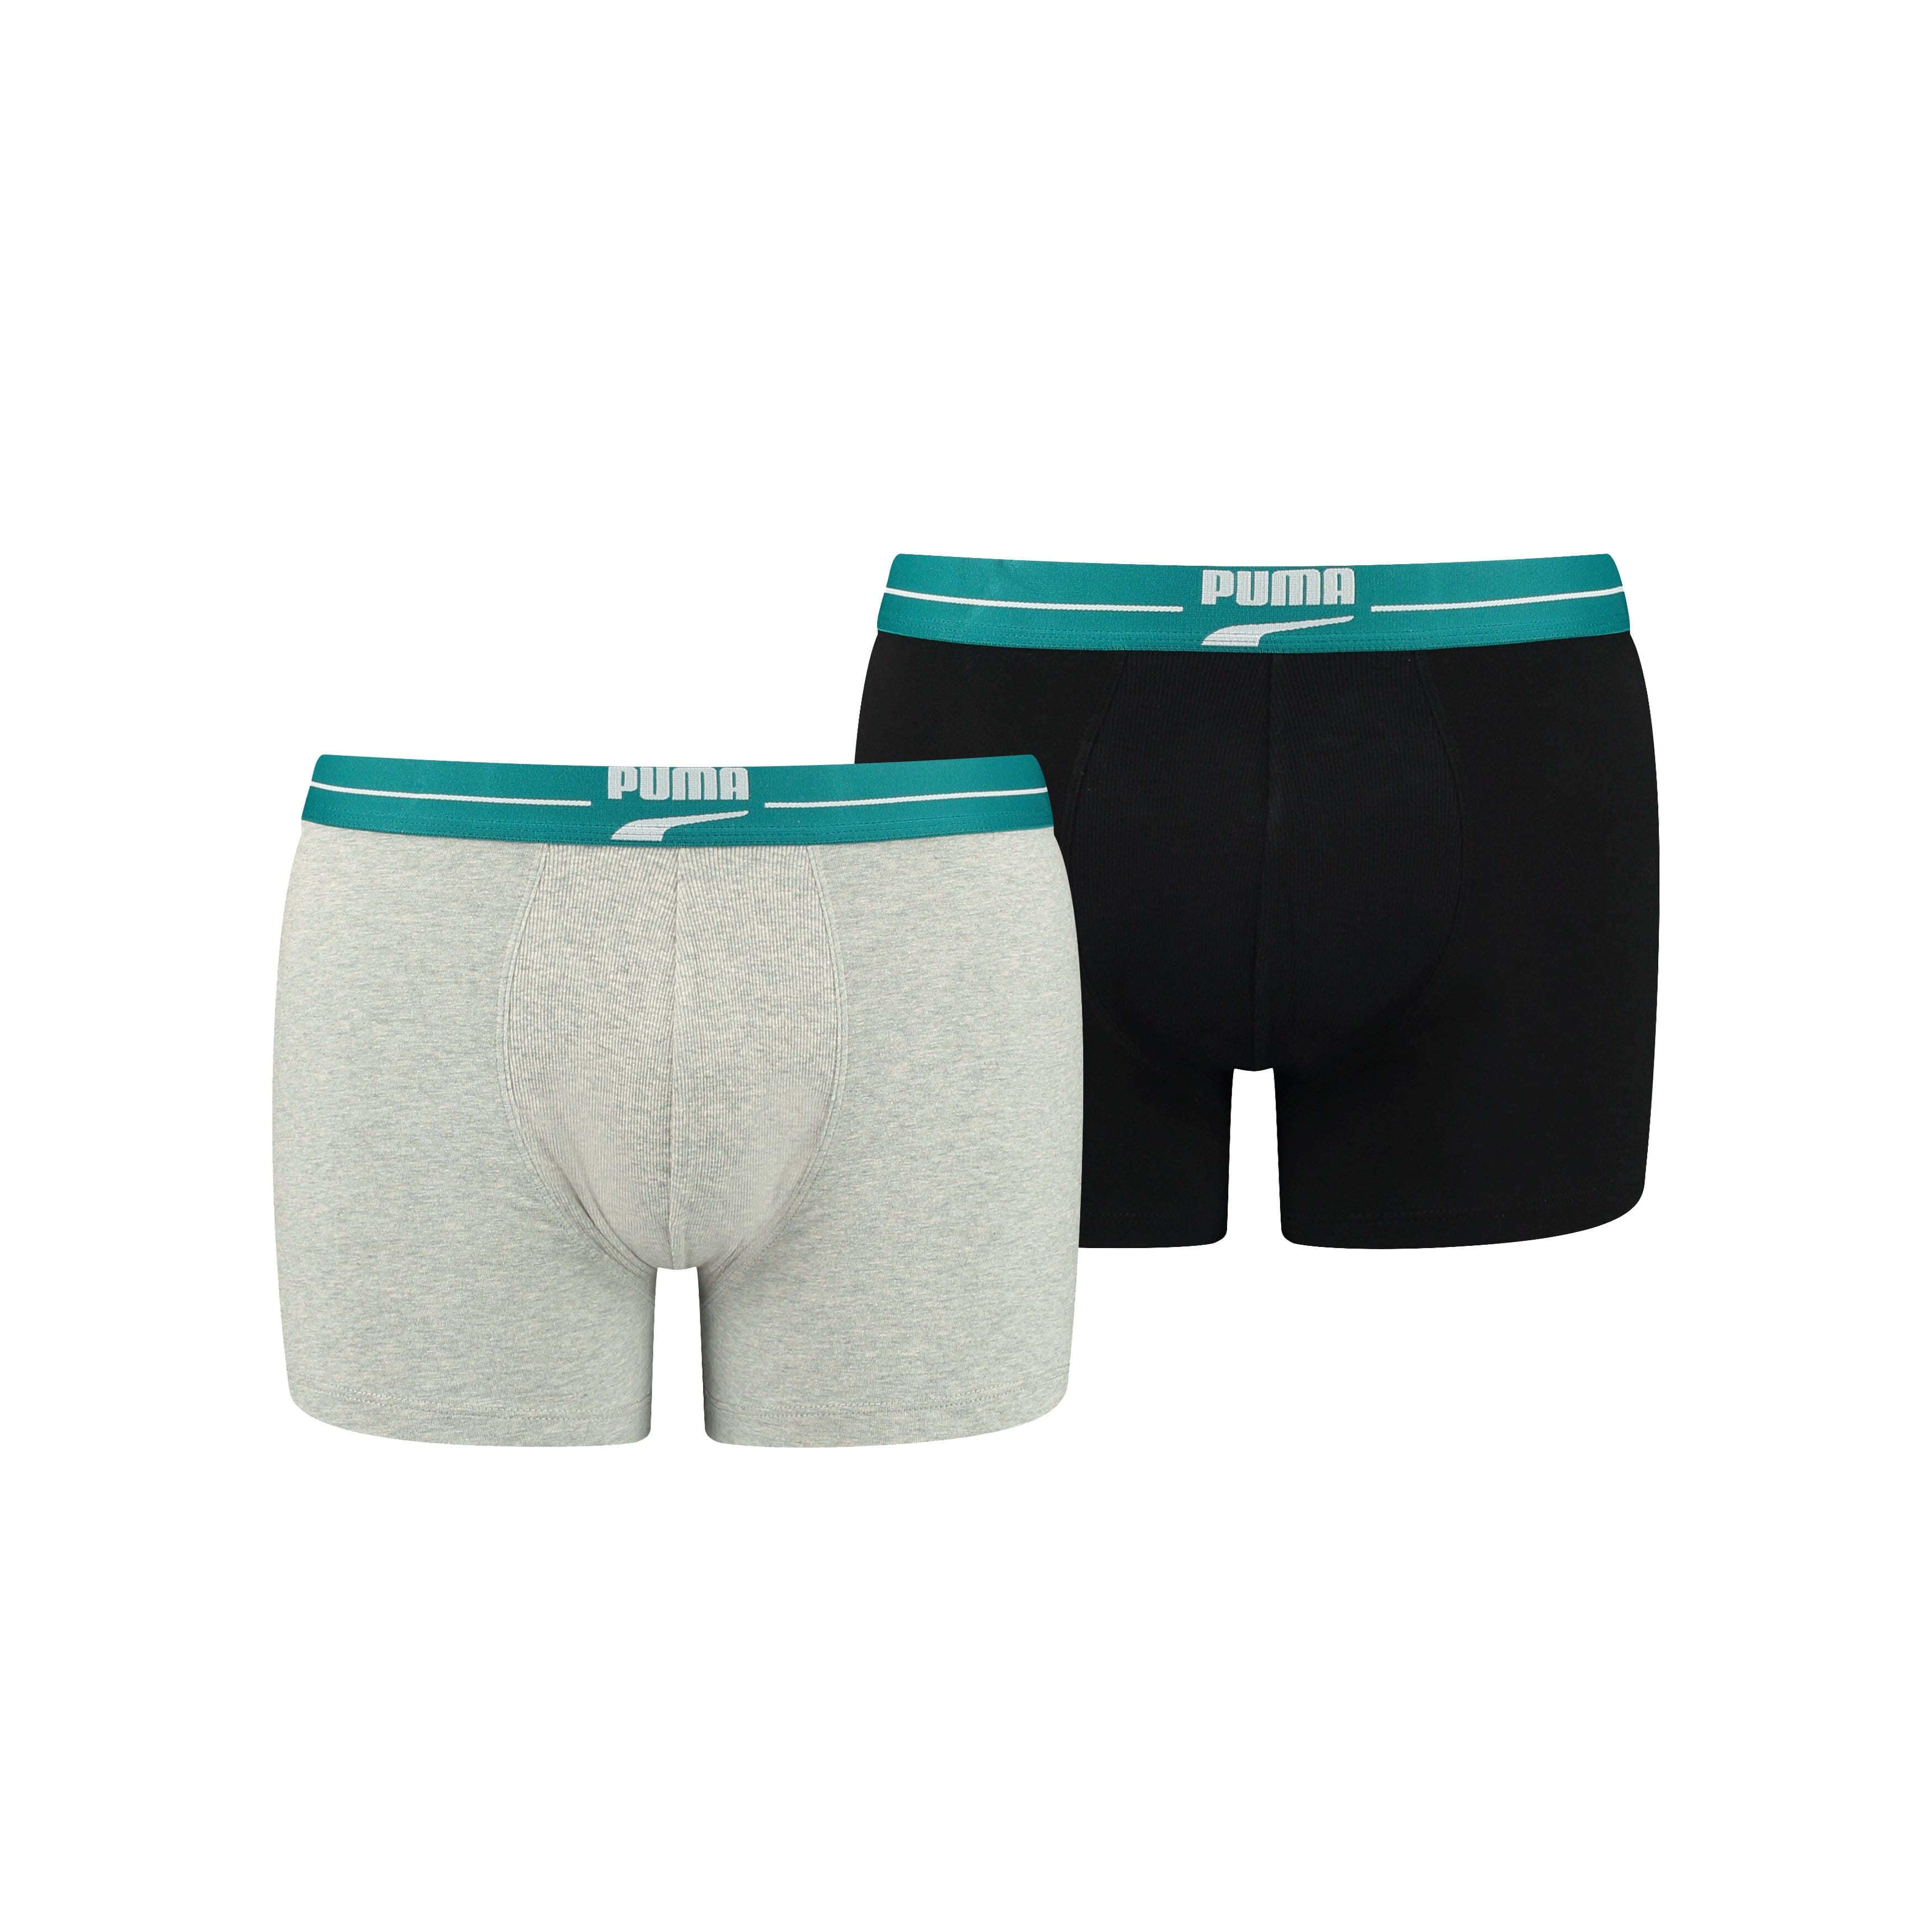 Puma - Men 2P - 2-pack - 701221415 Teal Combo – Into Underwear